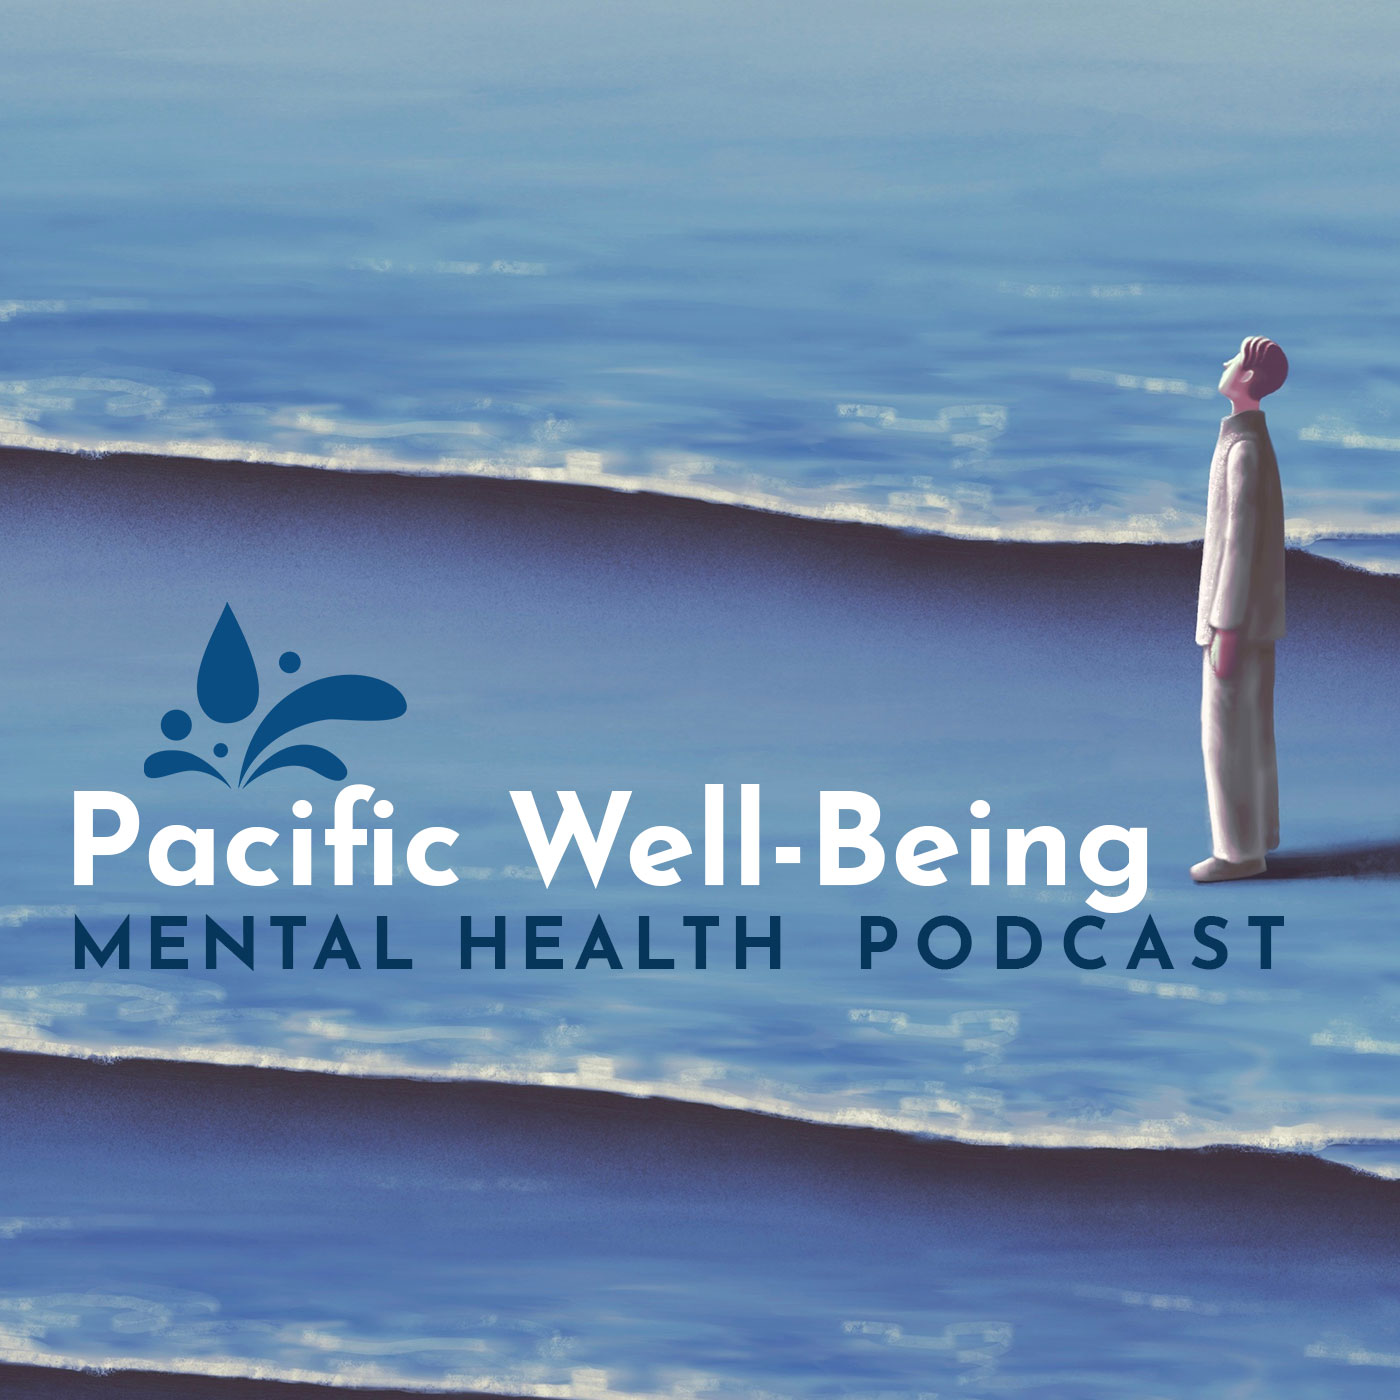 Pacific Well-Being Mental Health